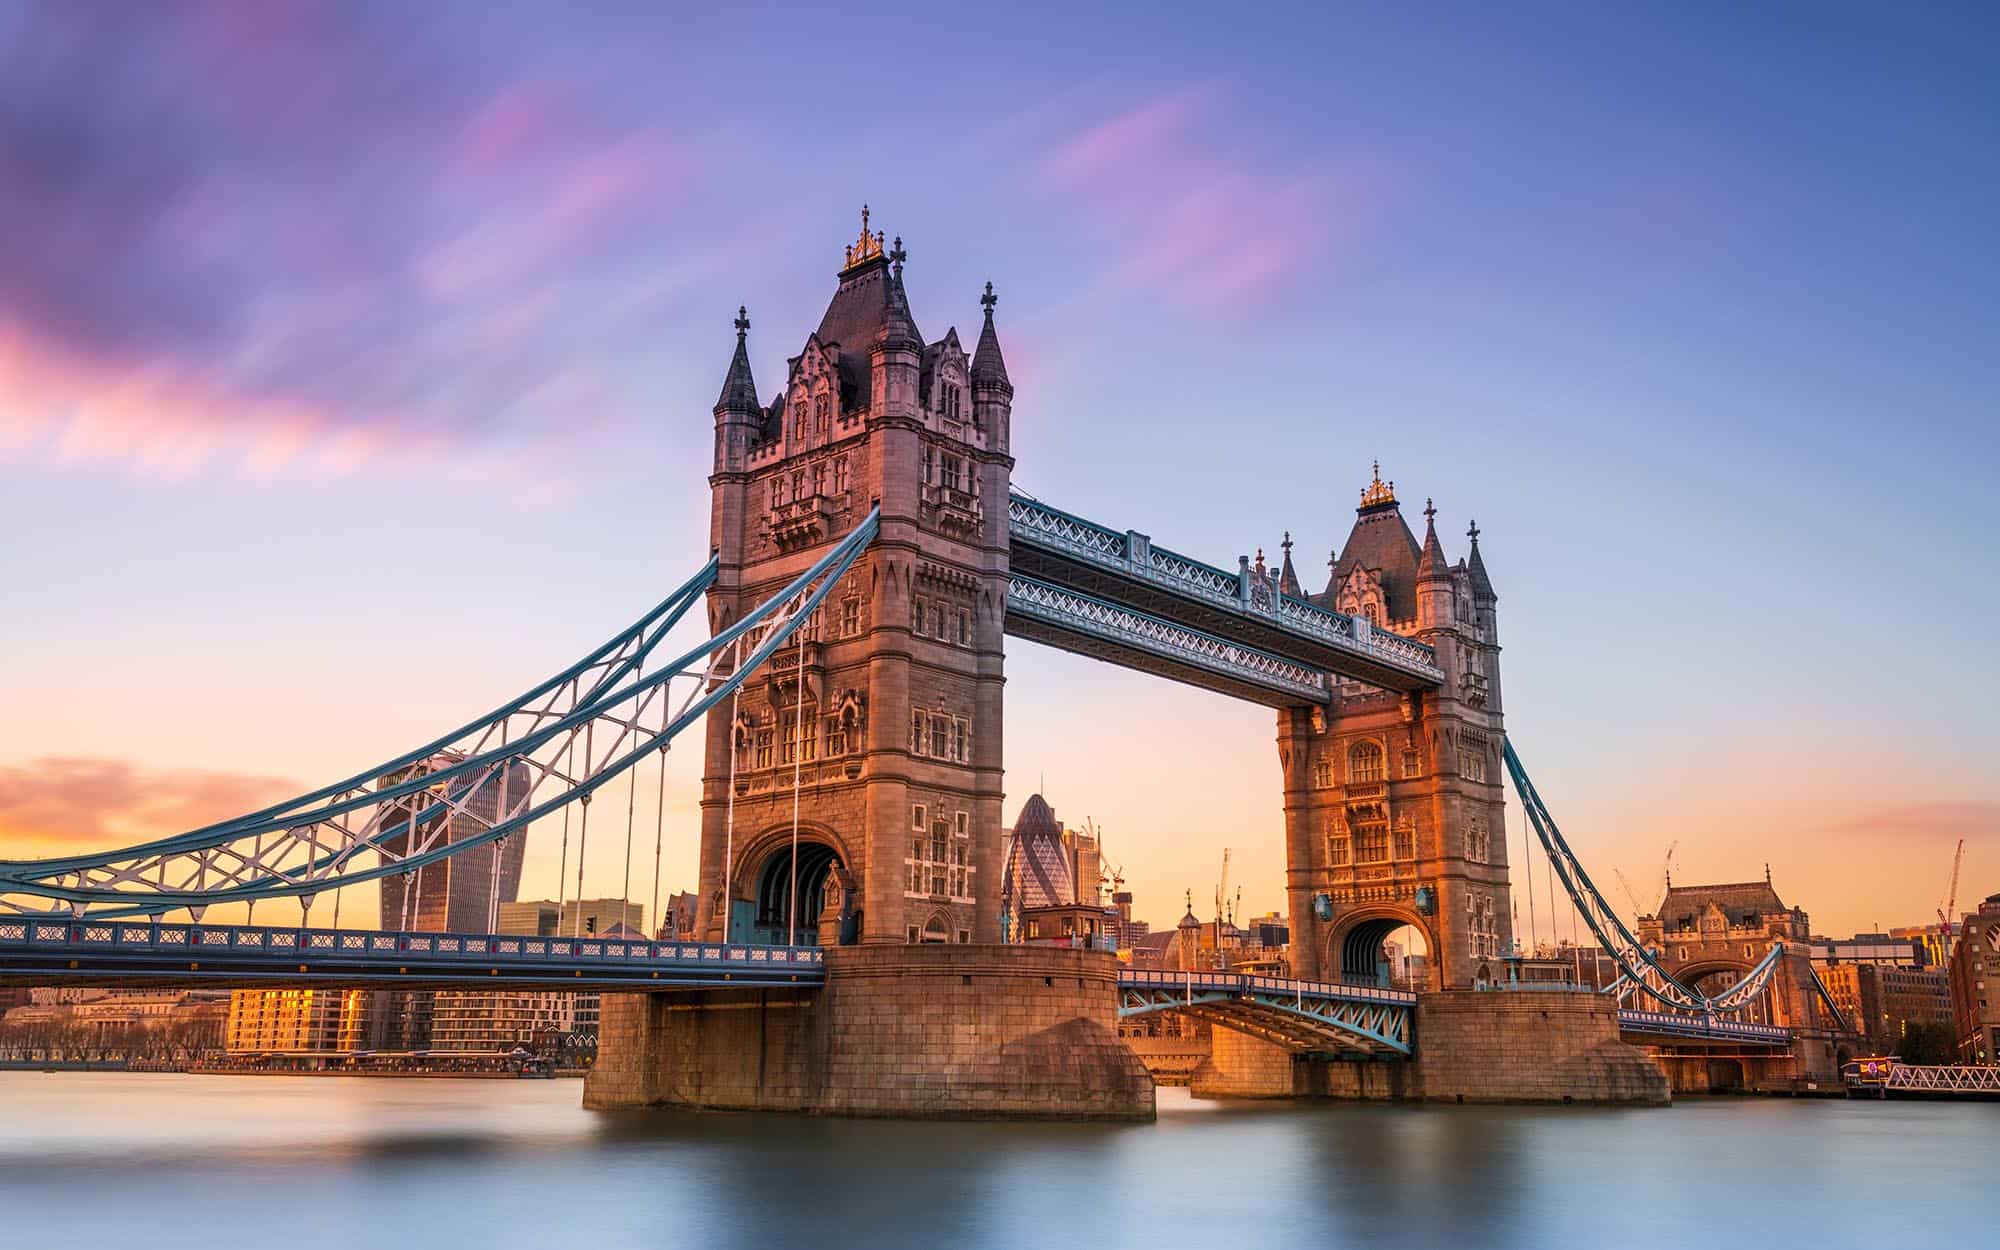 Side view of the tower bridge in London during sunset